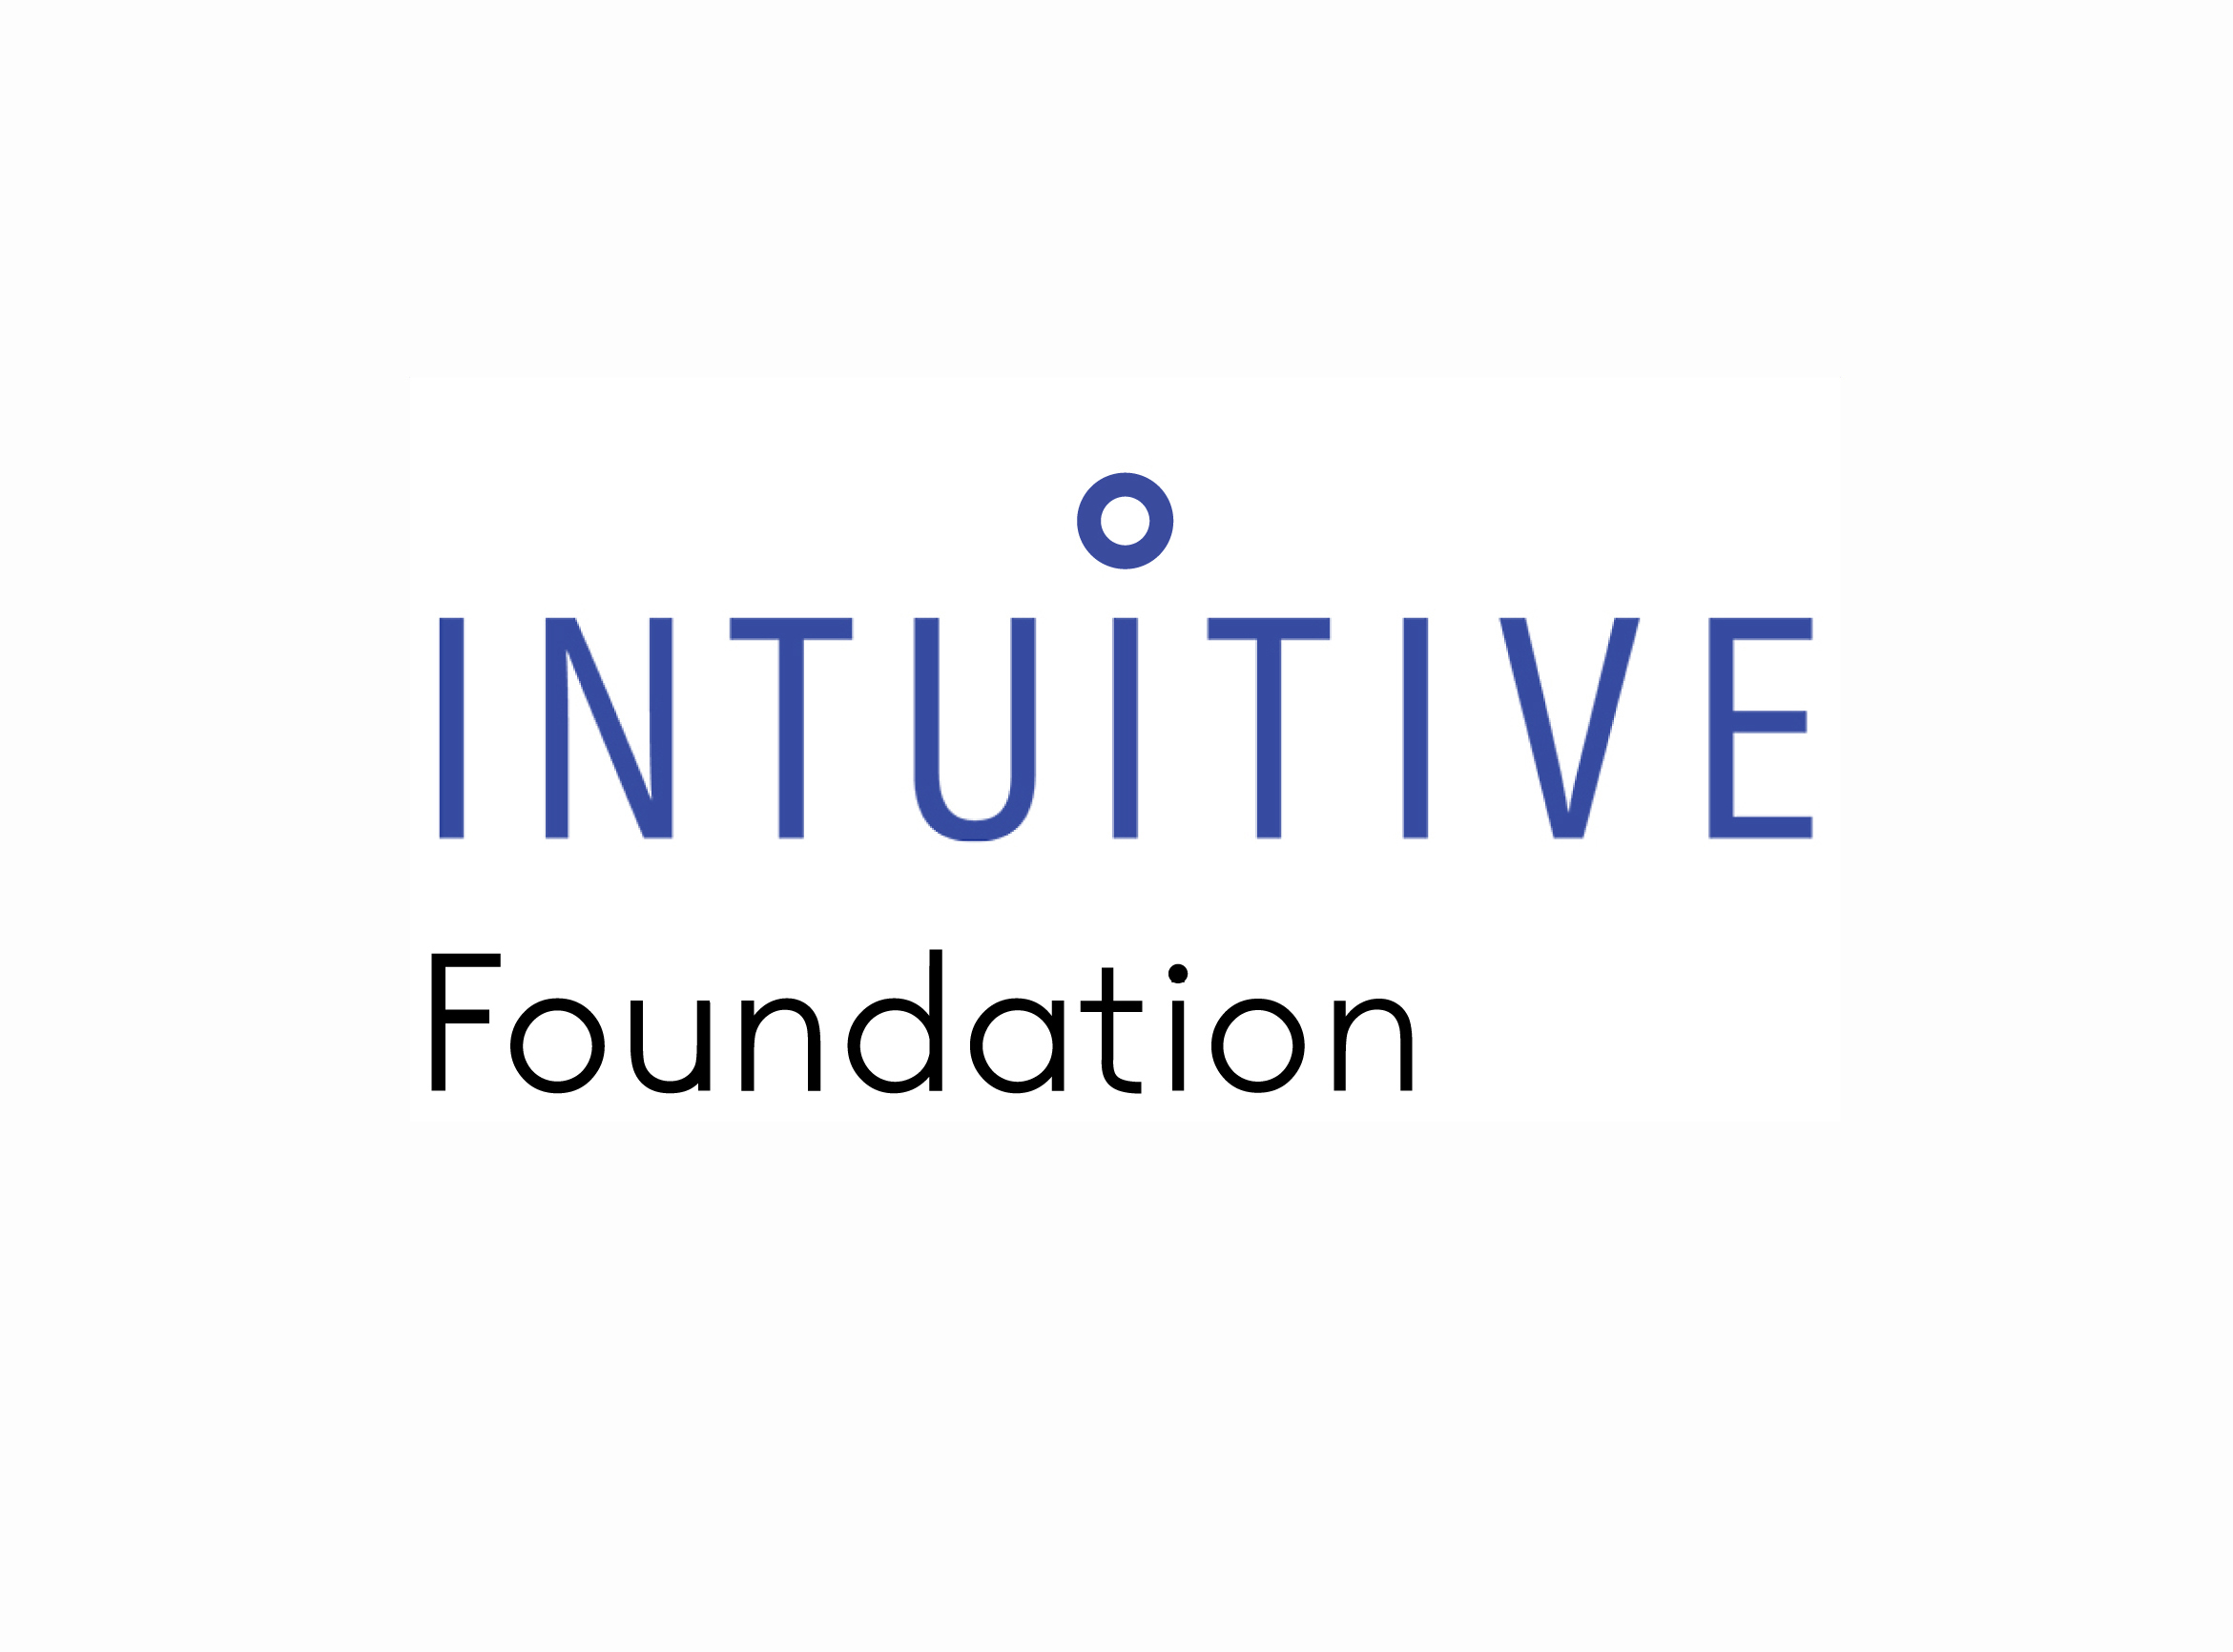 Intuitive Foundation